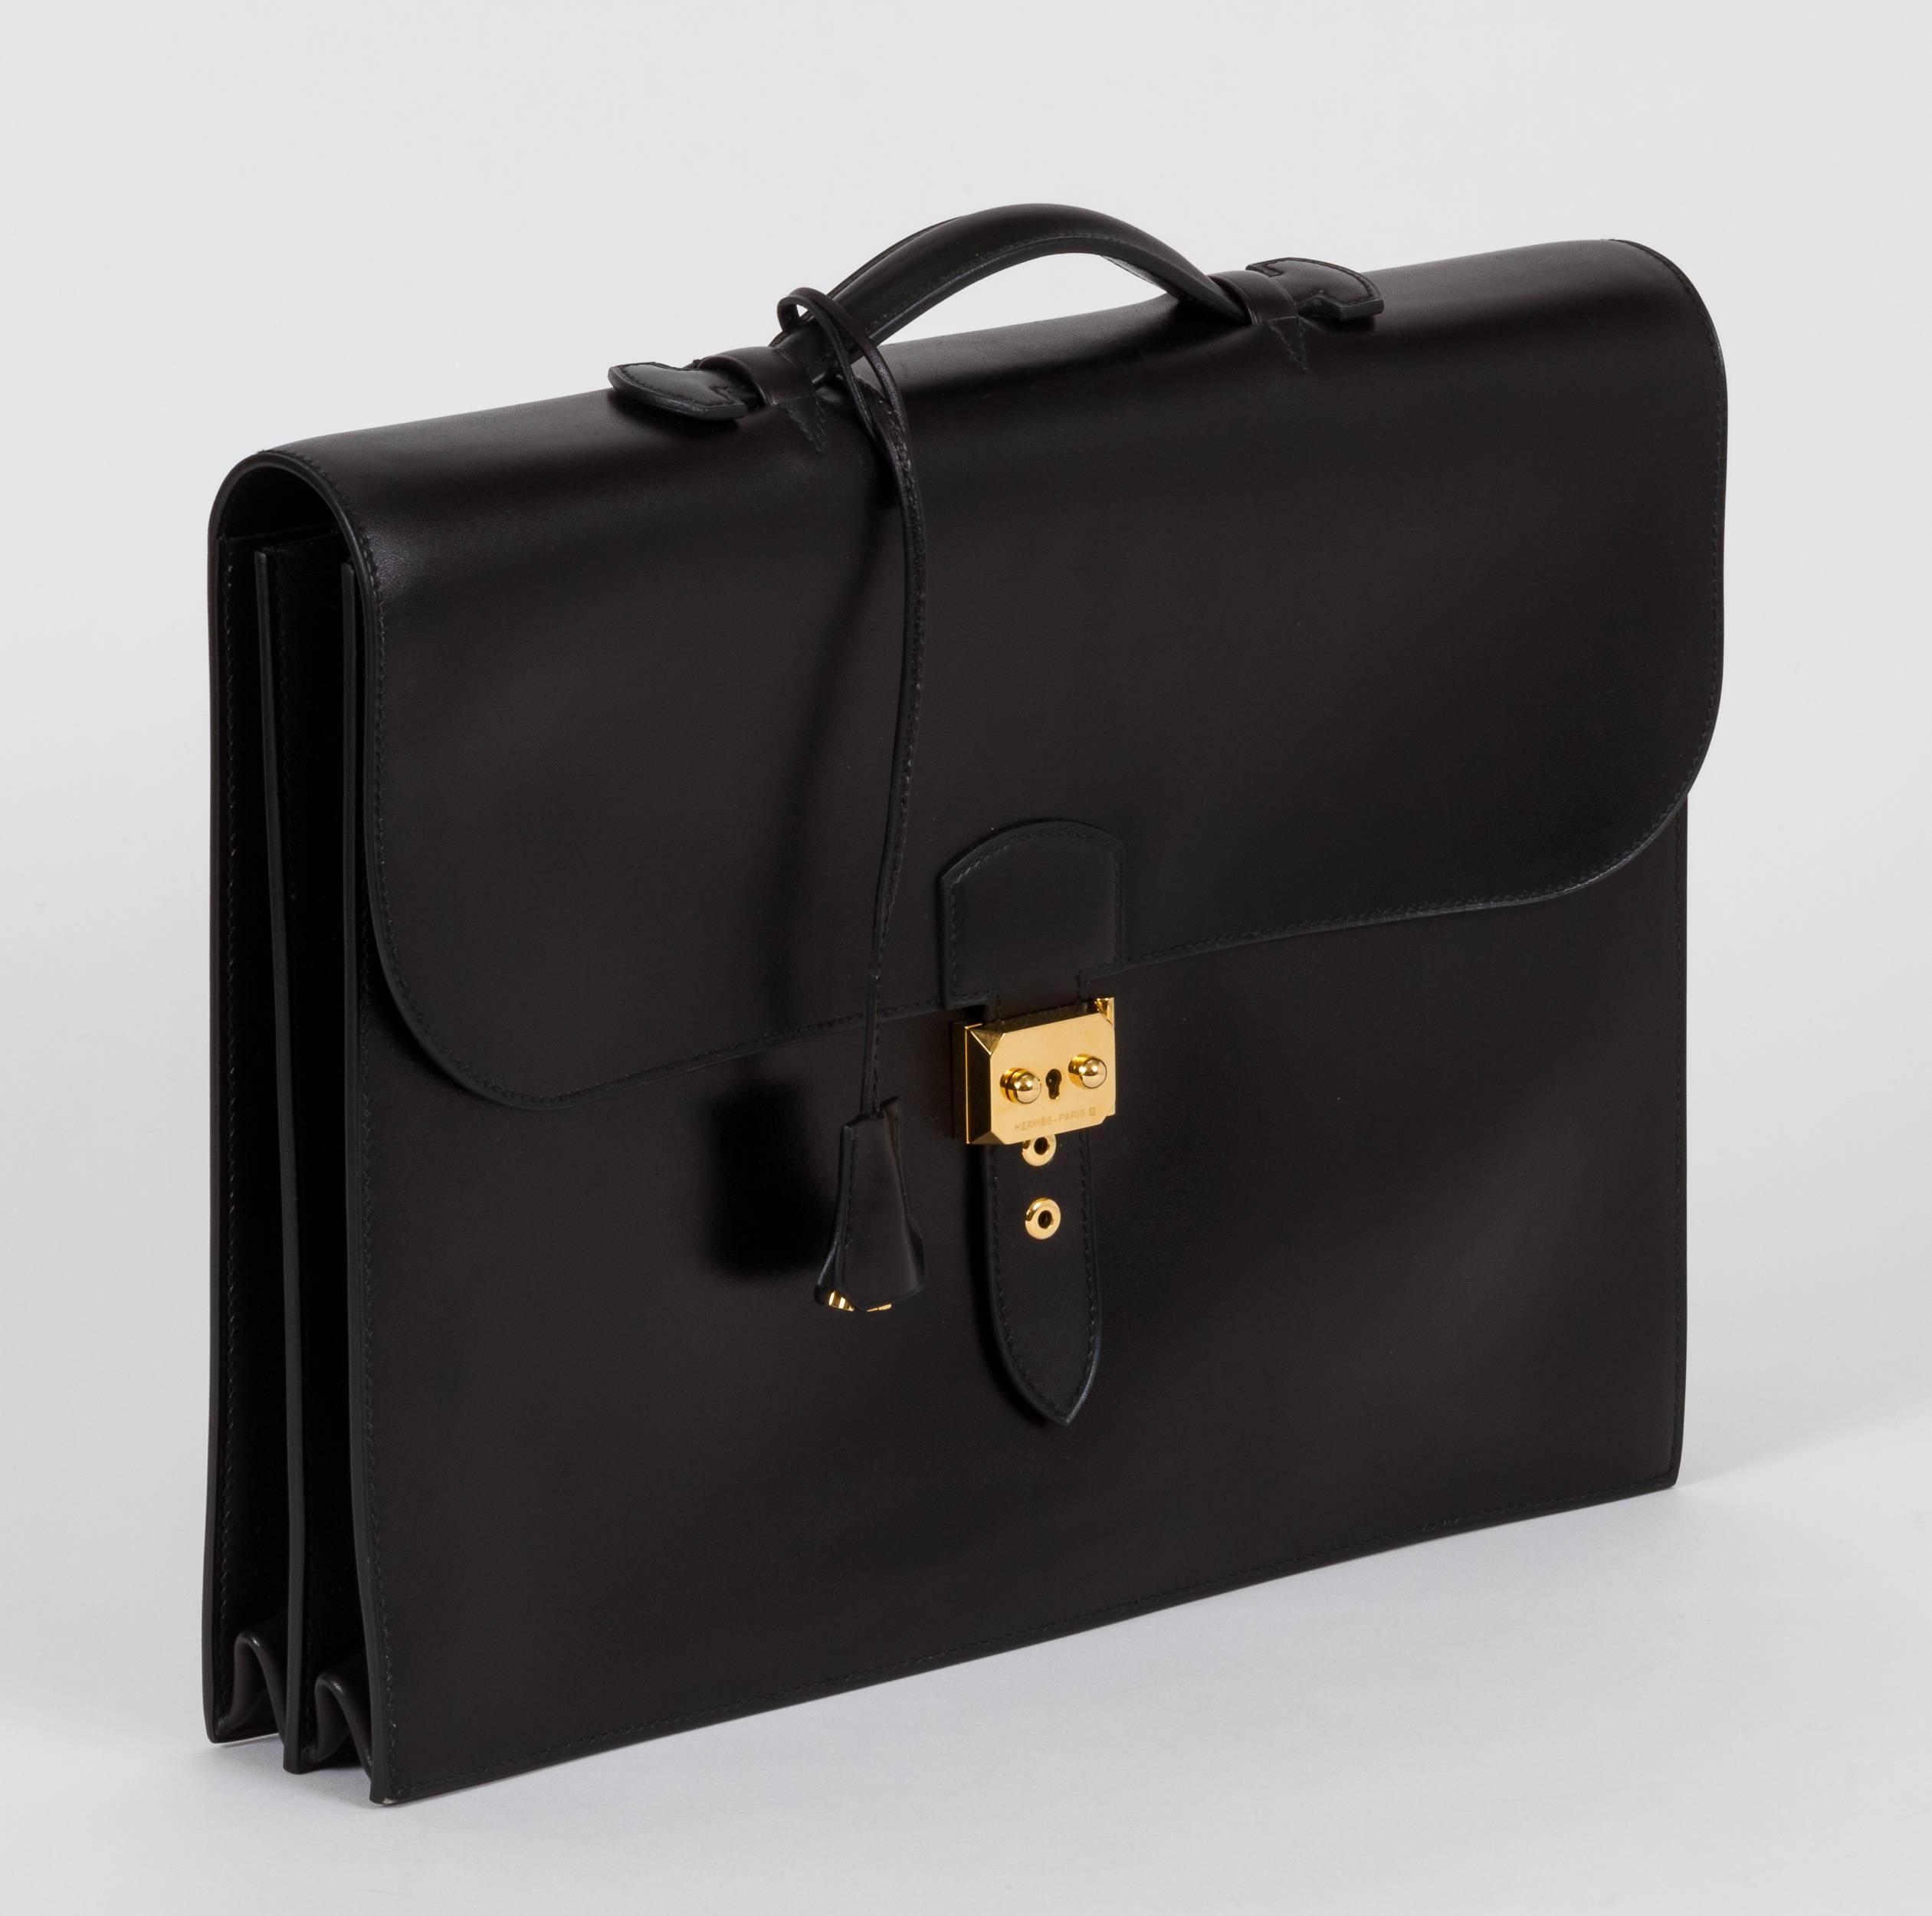 Hermès Sac a Depeche unisex briefcase. Black box calf leather and goldtone hardware. Marked 